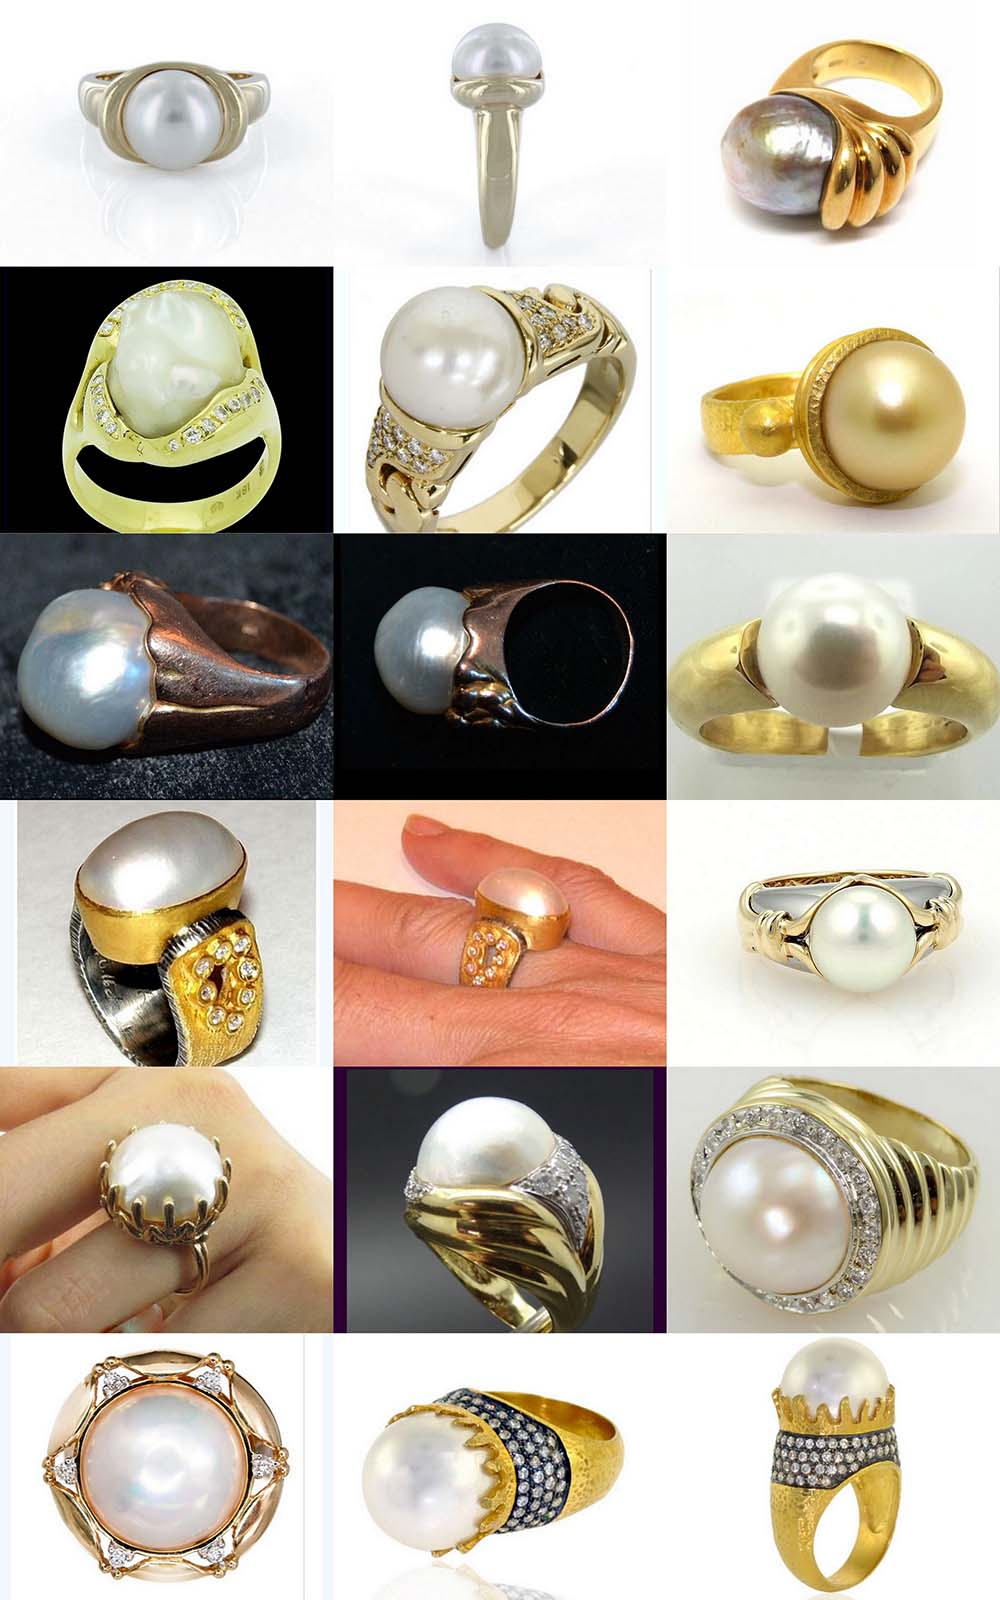 Astrogems can make astrological pearl rings in any style.